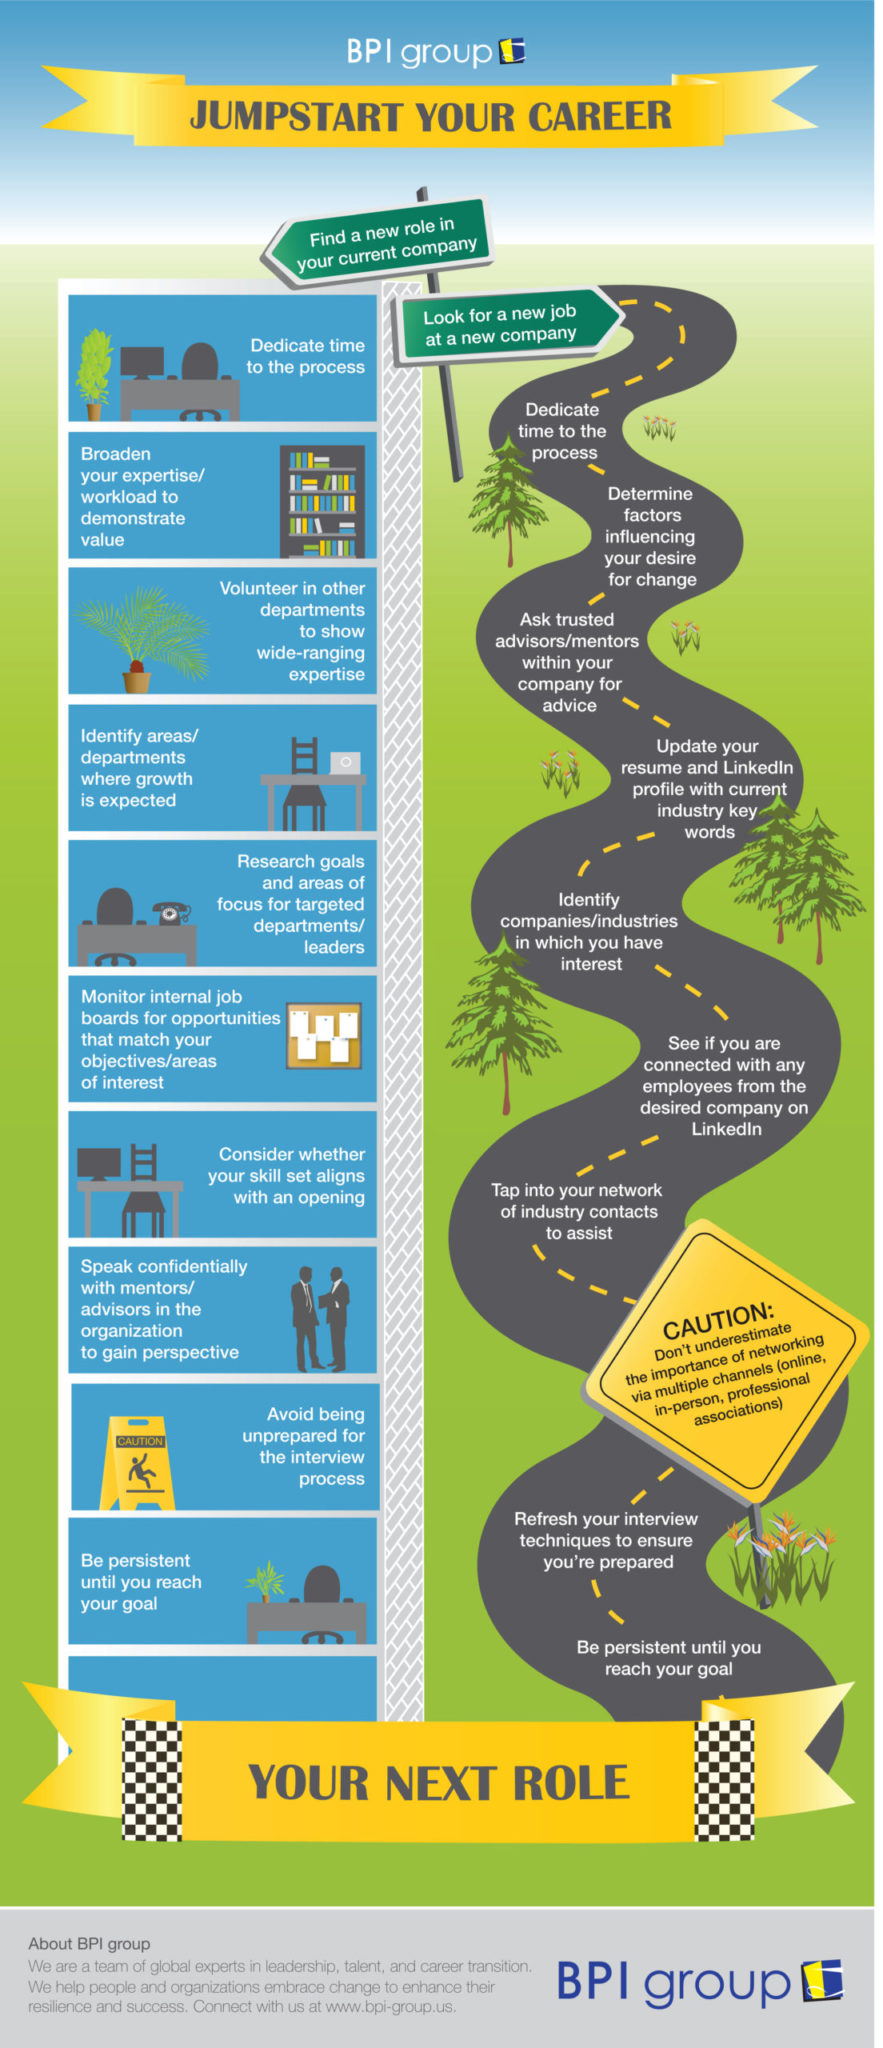 Infographic on how to jumpstart your career and find your next role